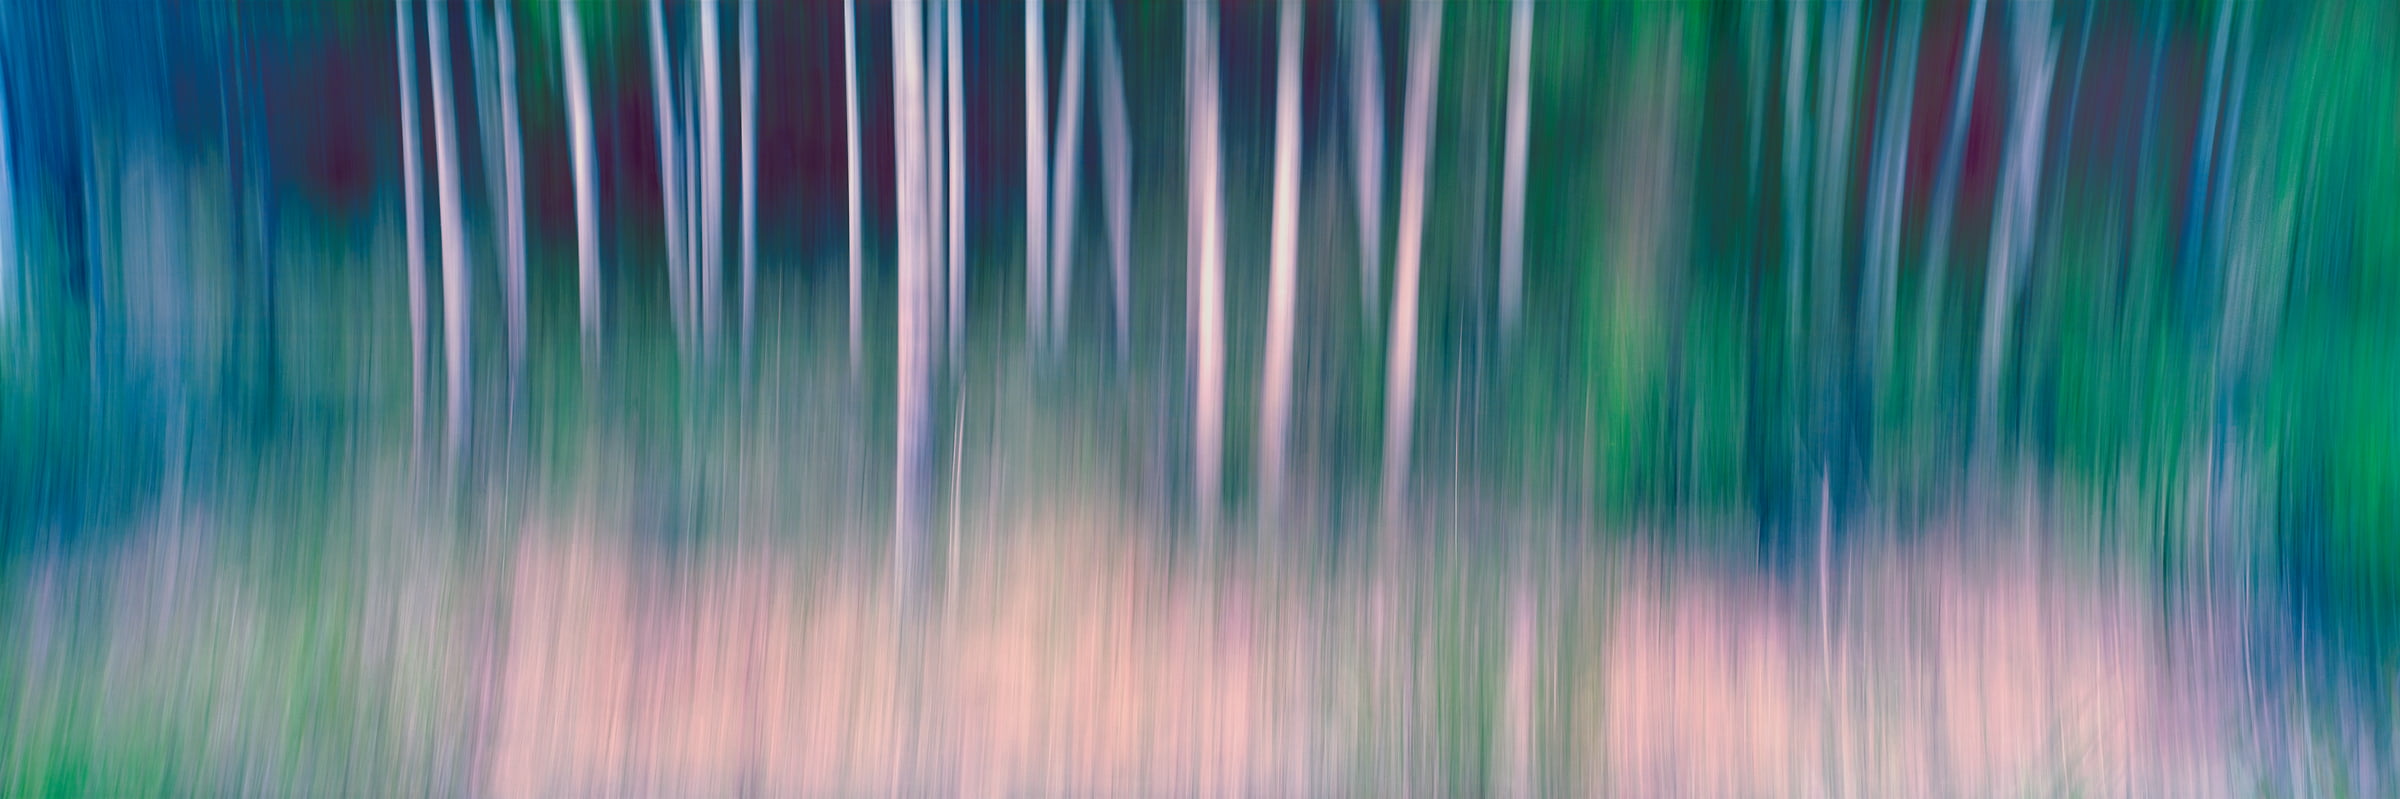 333 megapixels! A very high resolution, large-format, abstract photo of aspen trees; fine art photograph created by Scott Dimond in Kananaskis Country, Alberta, Canada